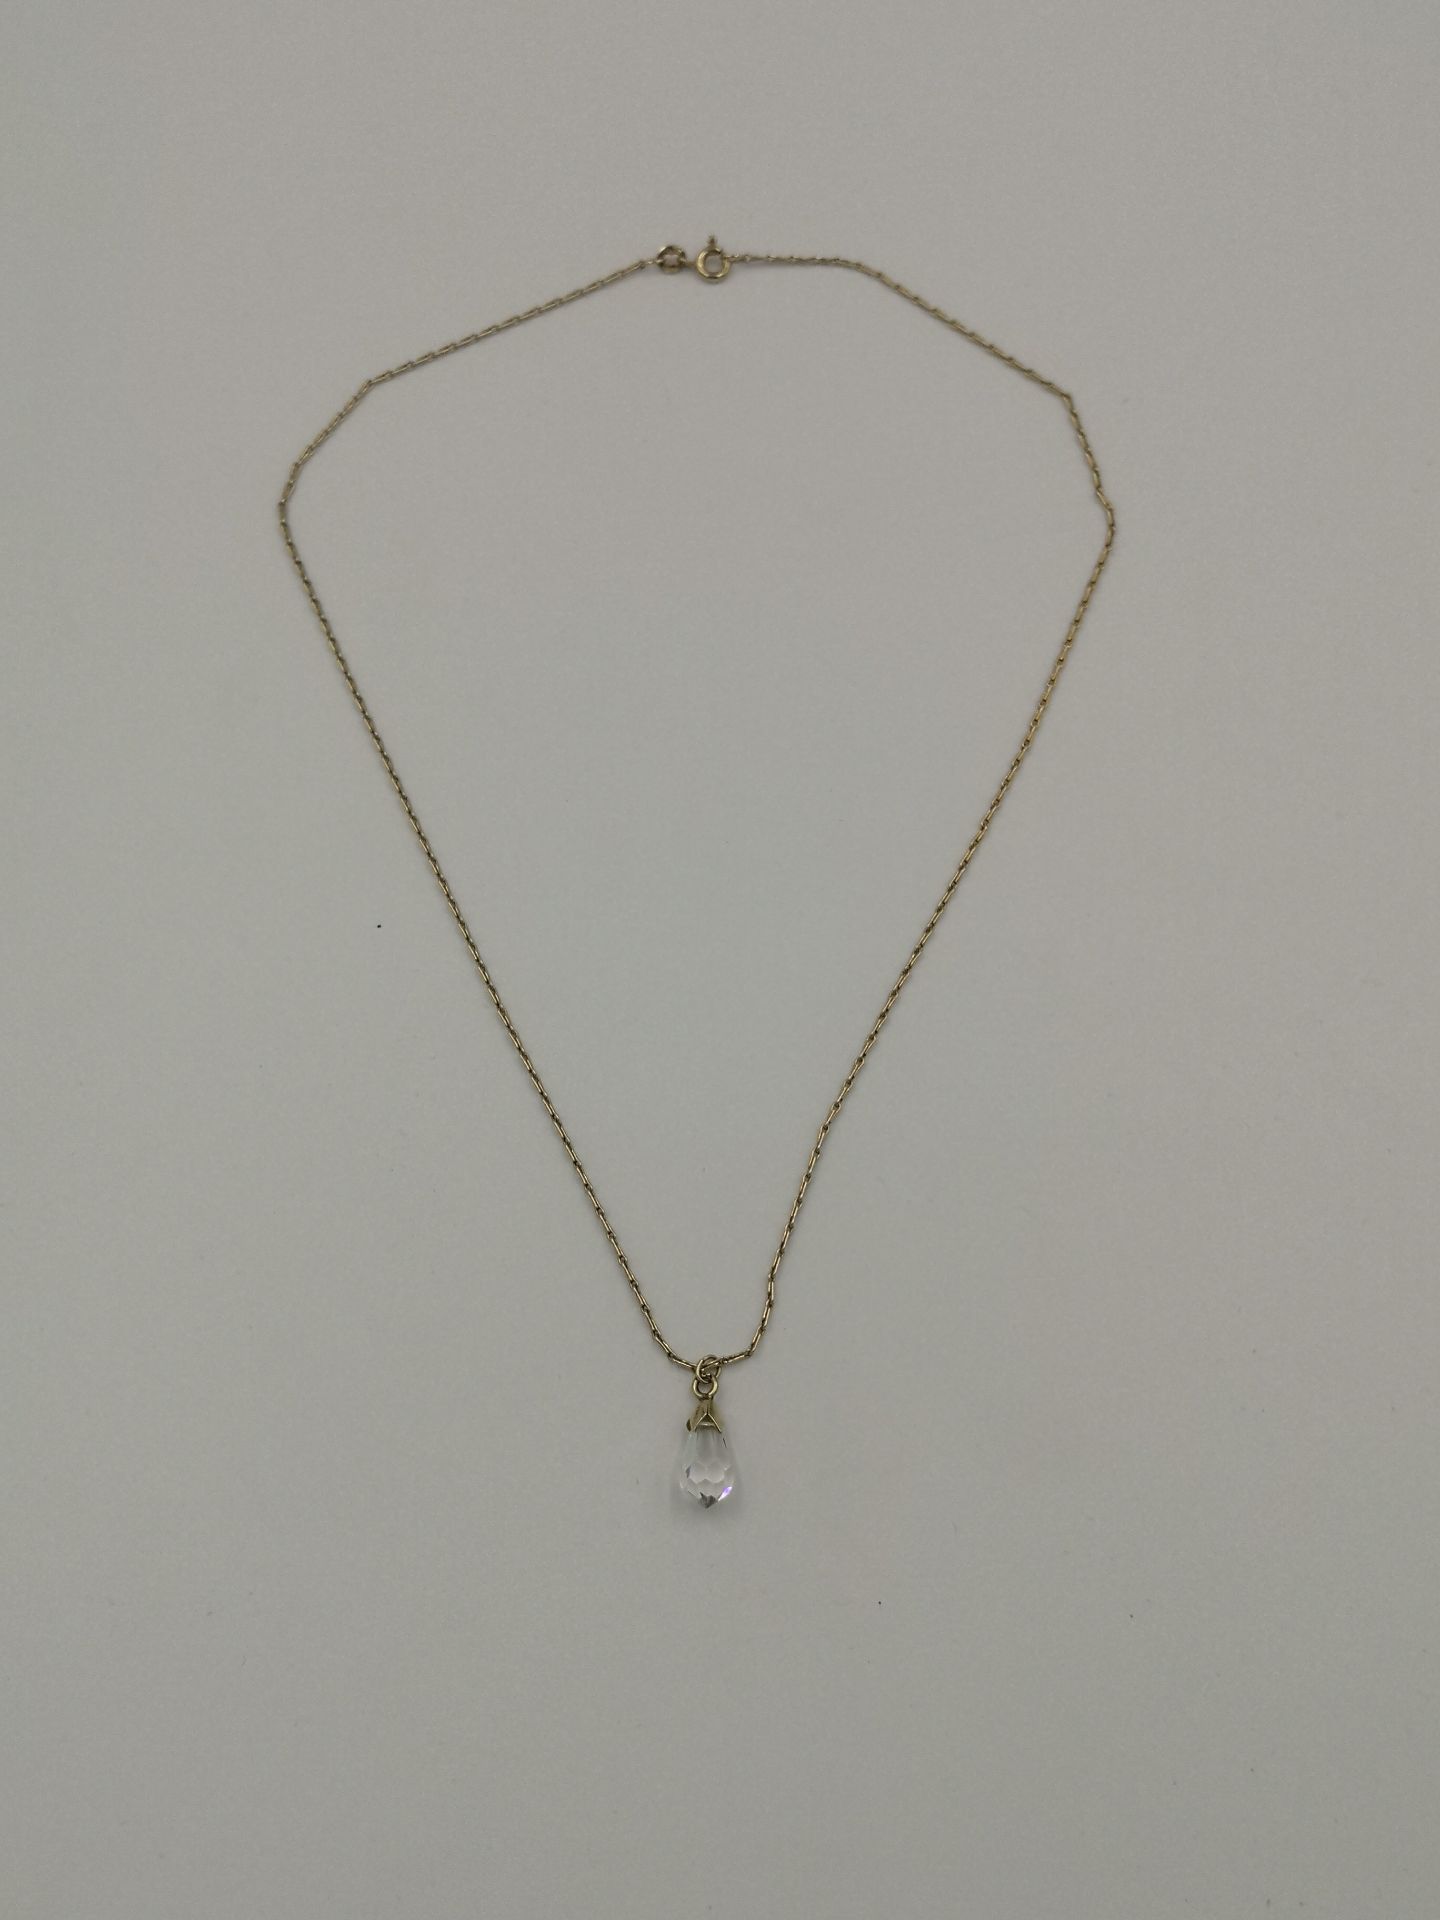 9ct gold chain with 9ct gold set glass pendant - Image 3 of 3